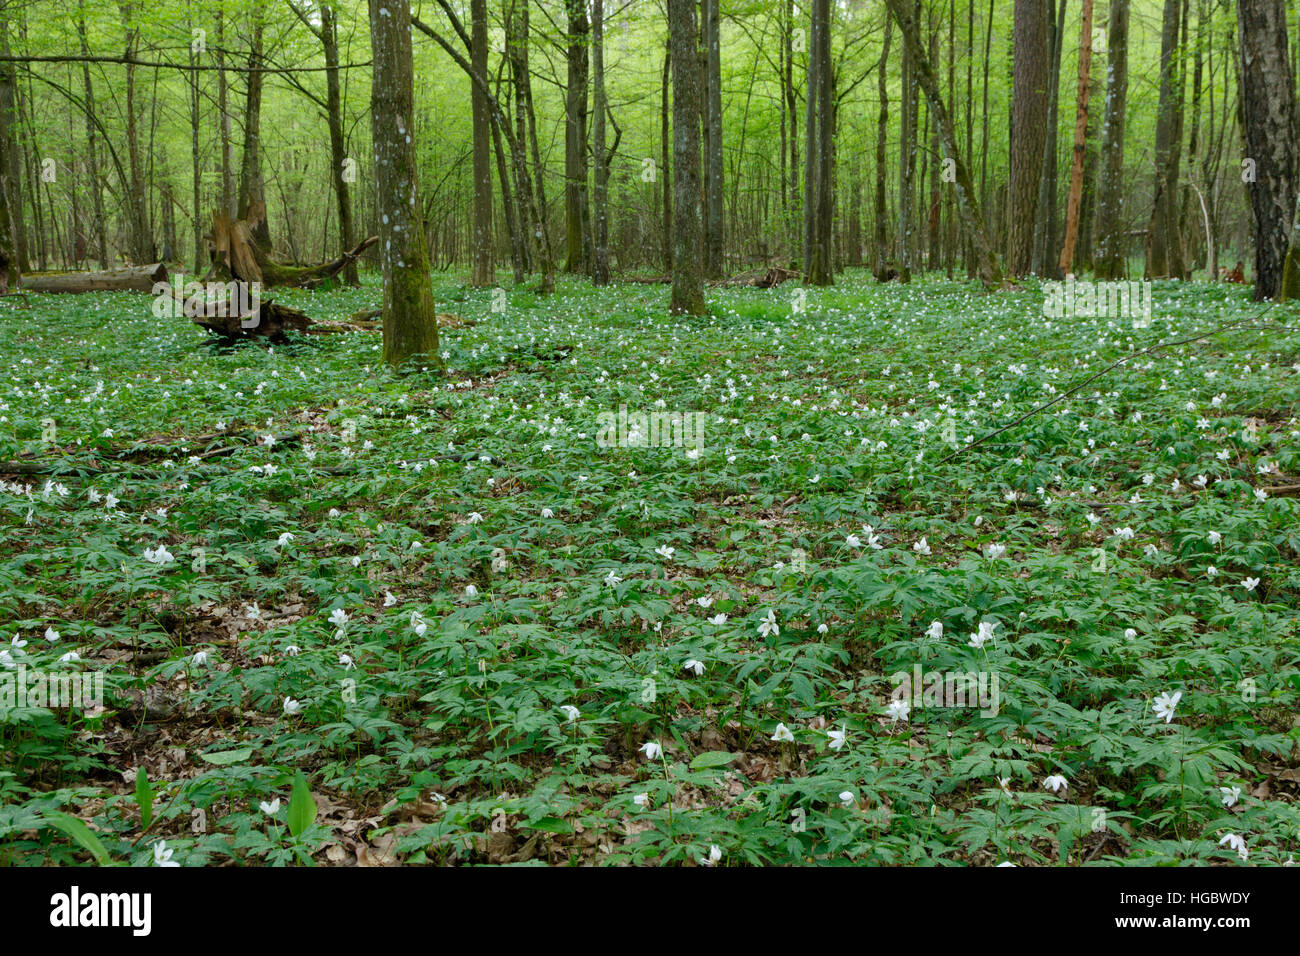 In spring flowering windflower and hornbeams around, Bialowieza Forest, Poland, Europe Stock Photo